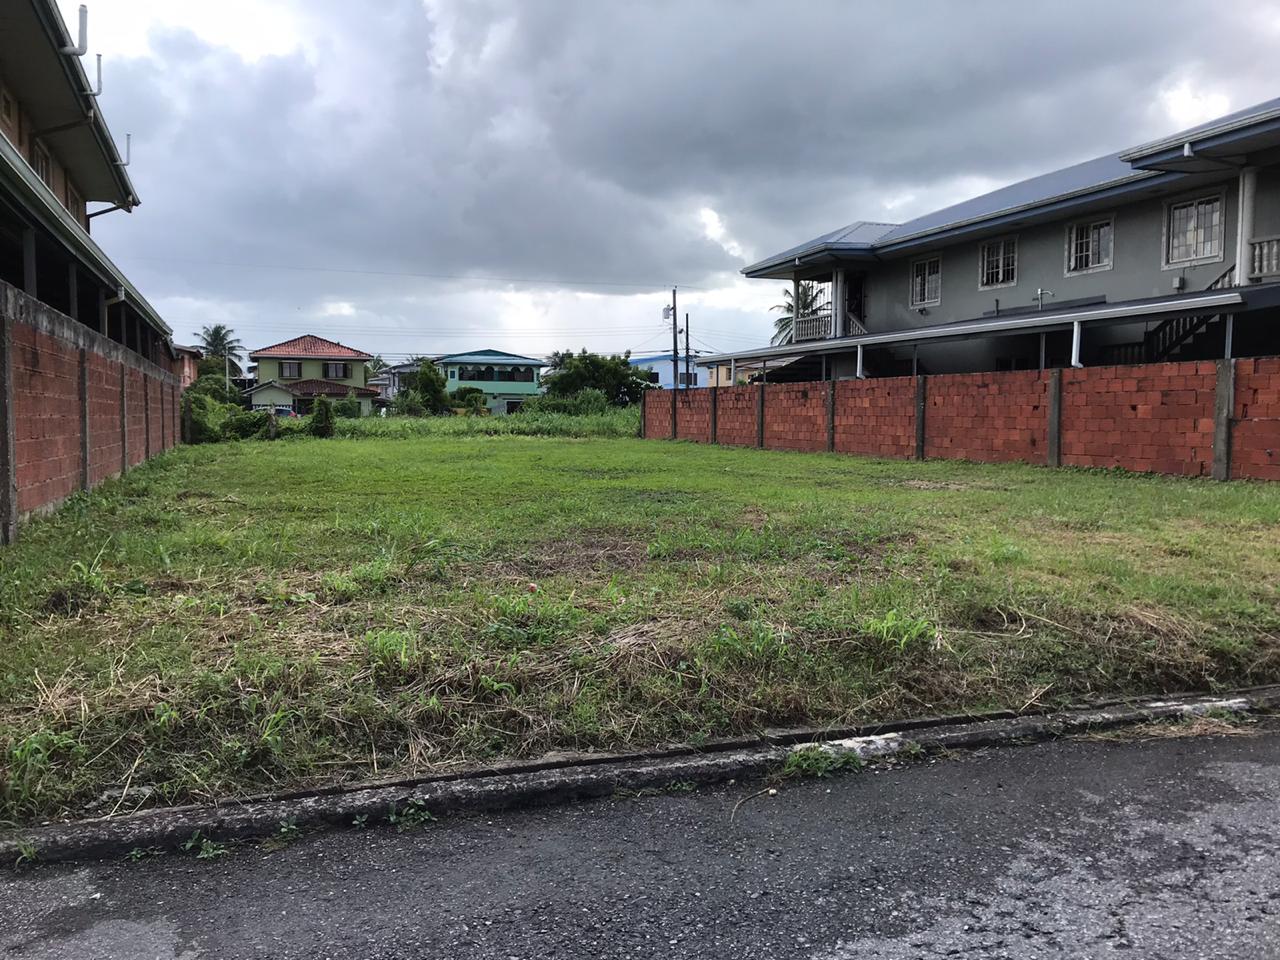 Orchard Gardens Land for Sale | My Bunch of Keys